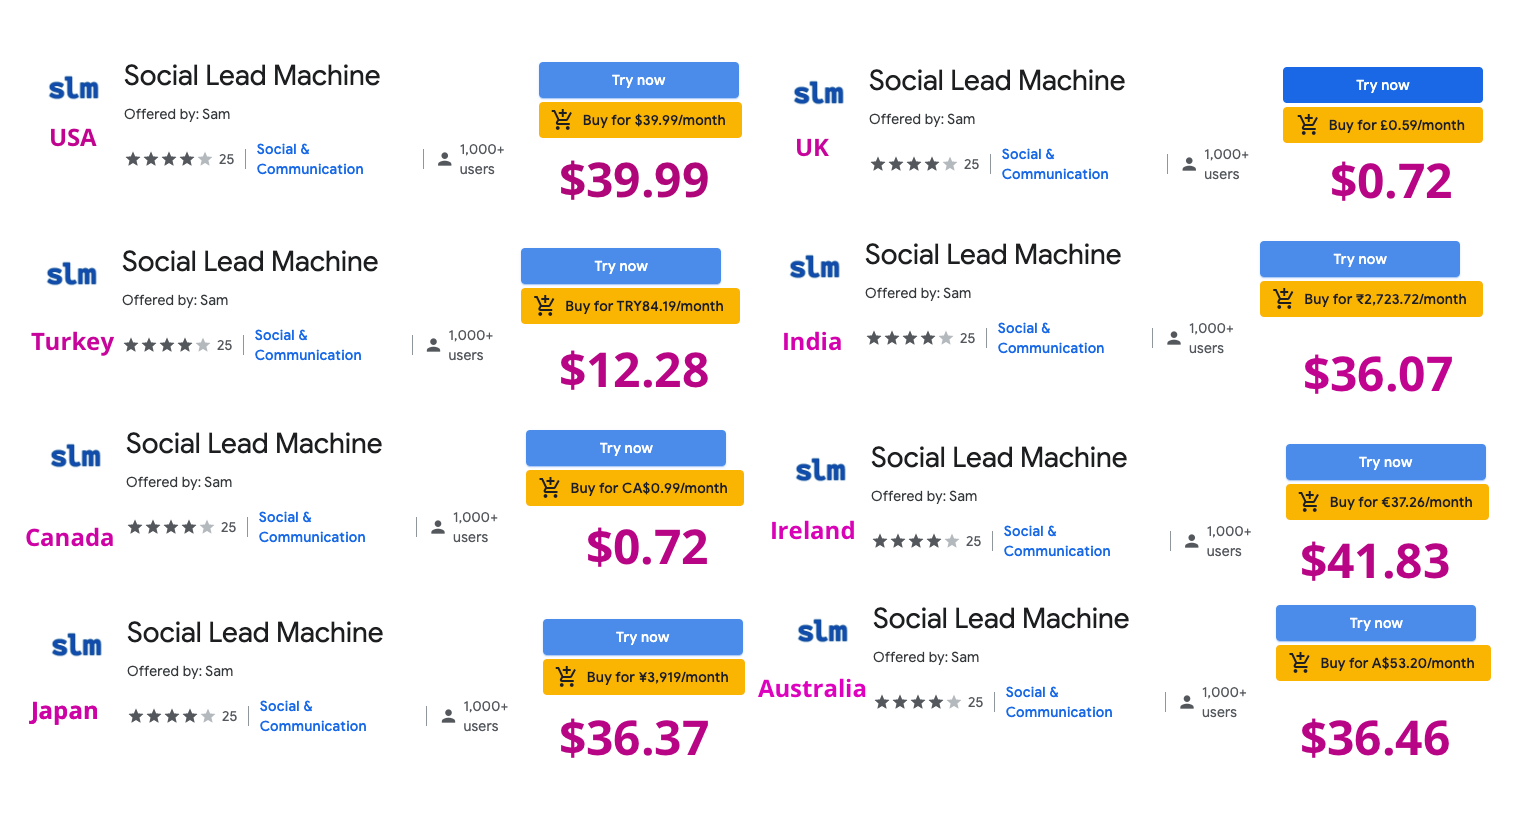 Social Lead Machine price in 8 different countries